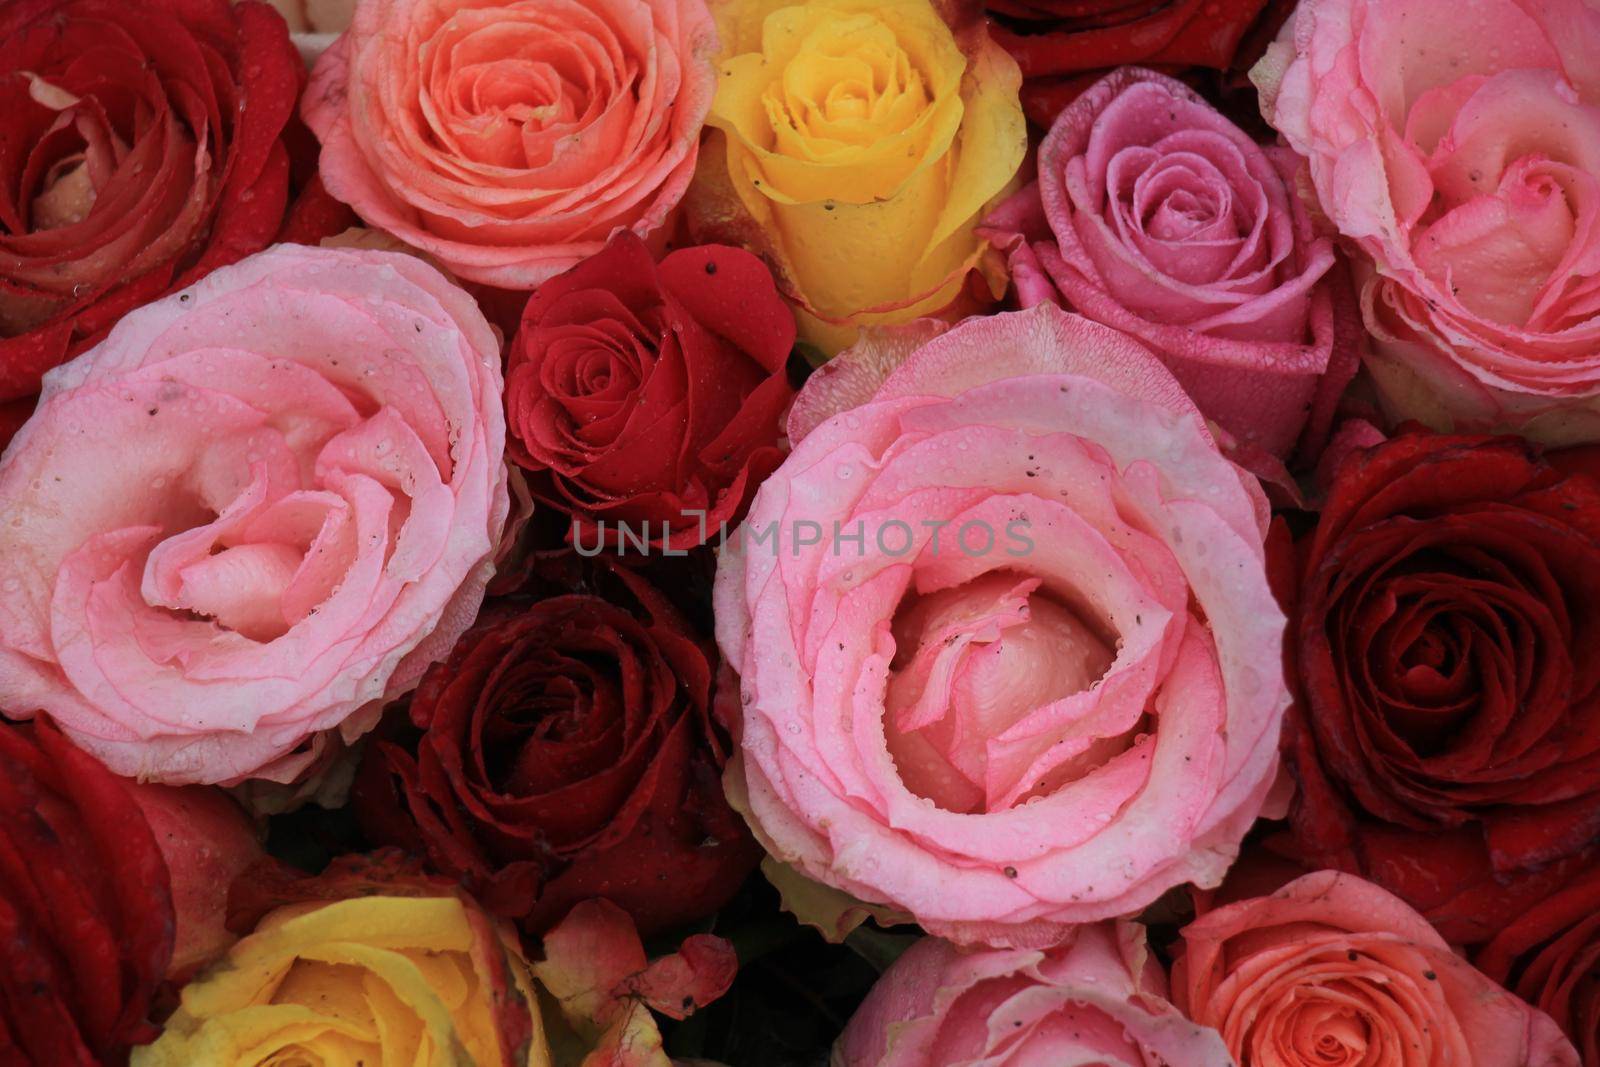 Multicolored roses in a floral wedding decoration by studioportosabbia